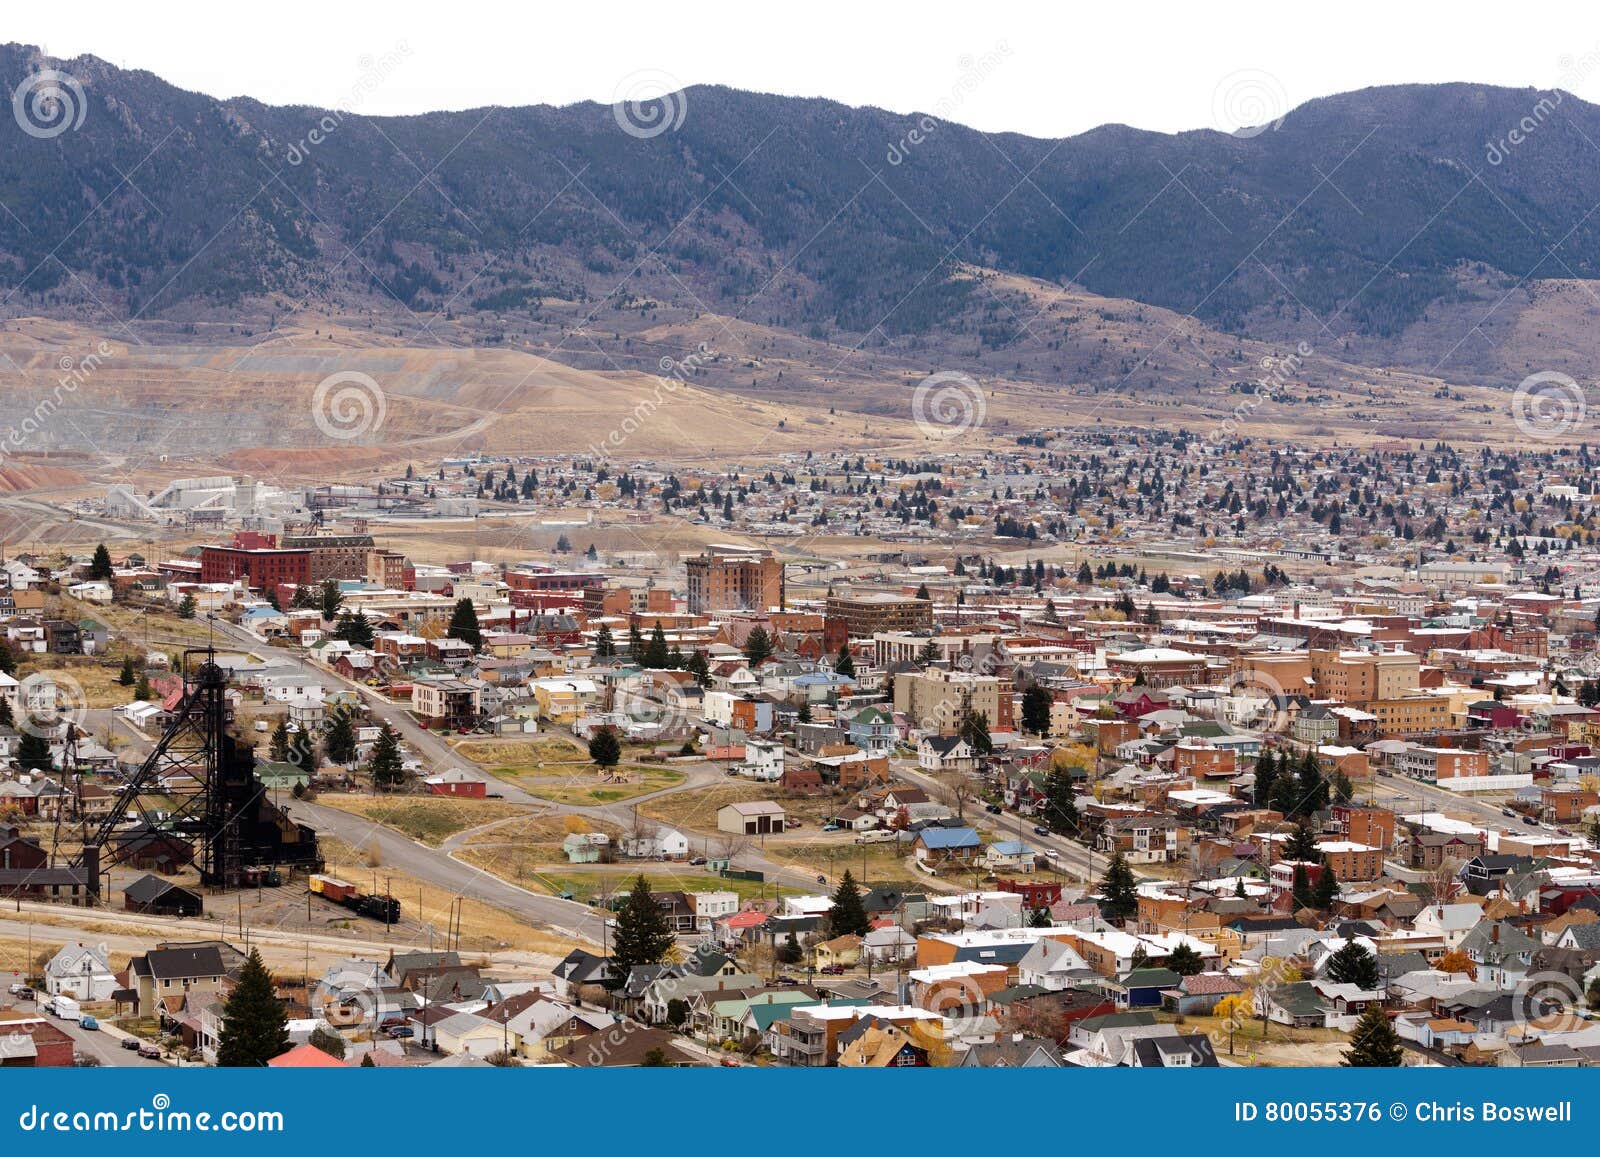 high angle overlook butte montana downtown usa united states